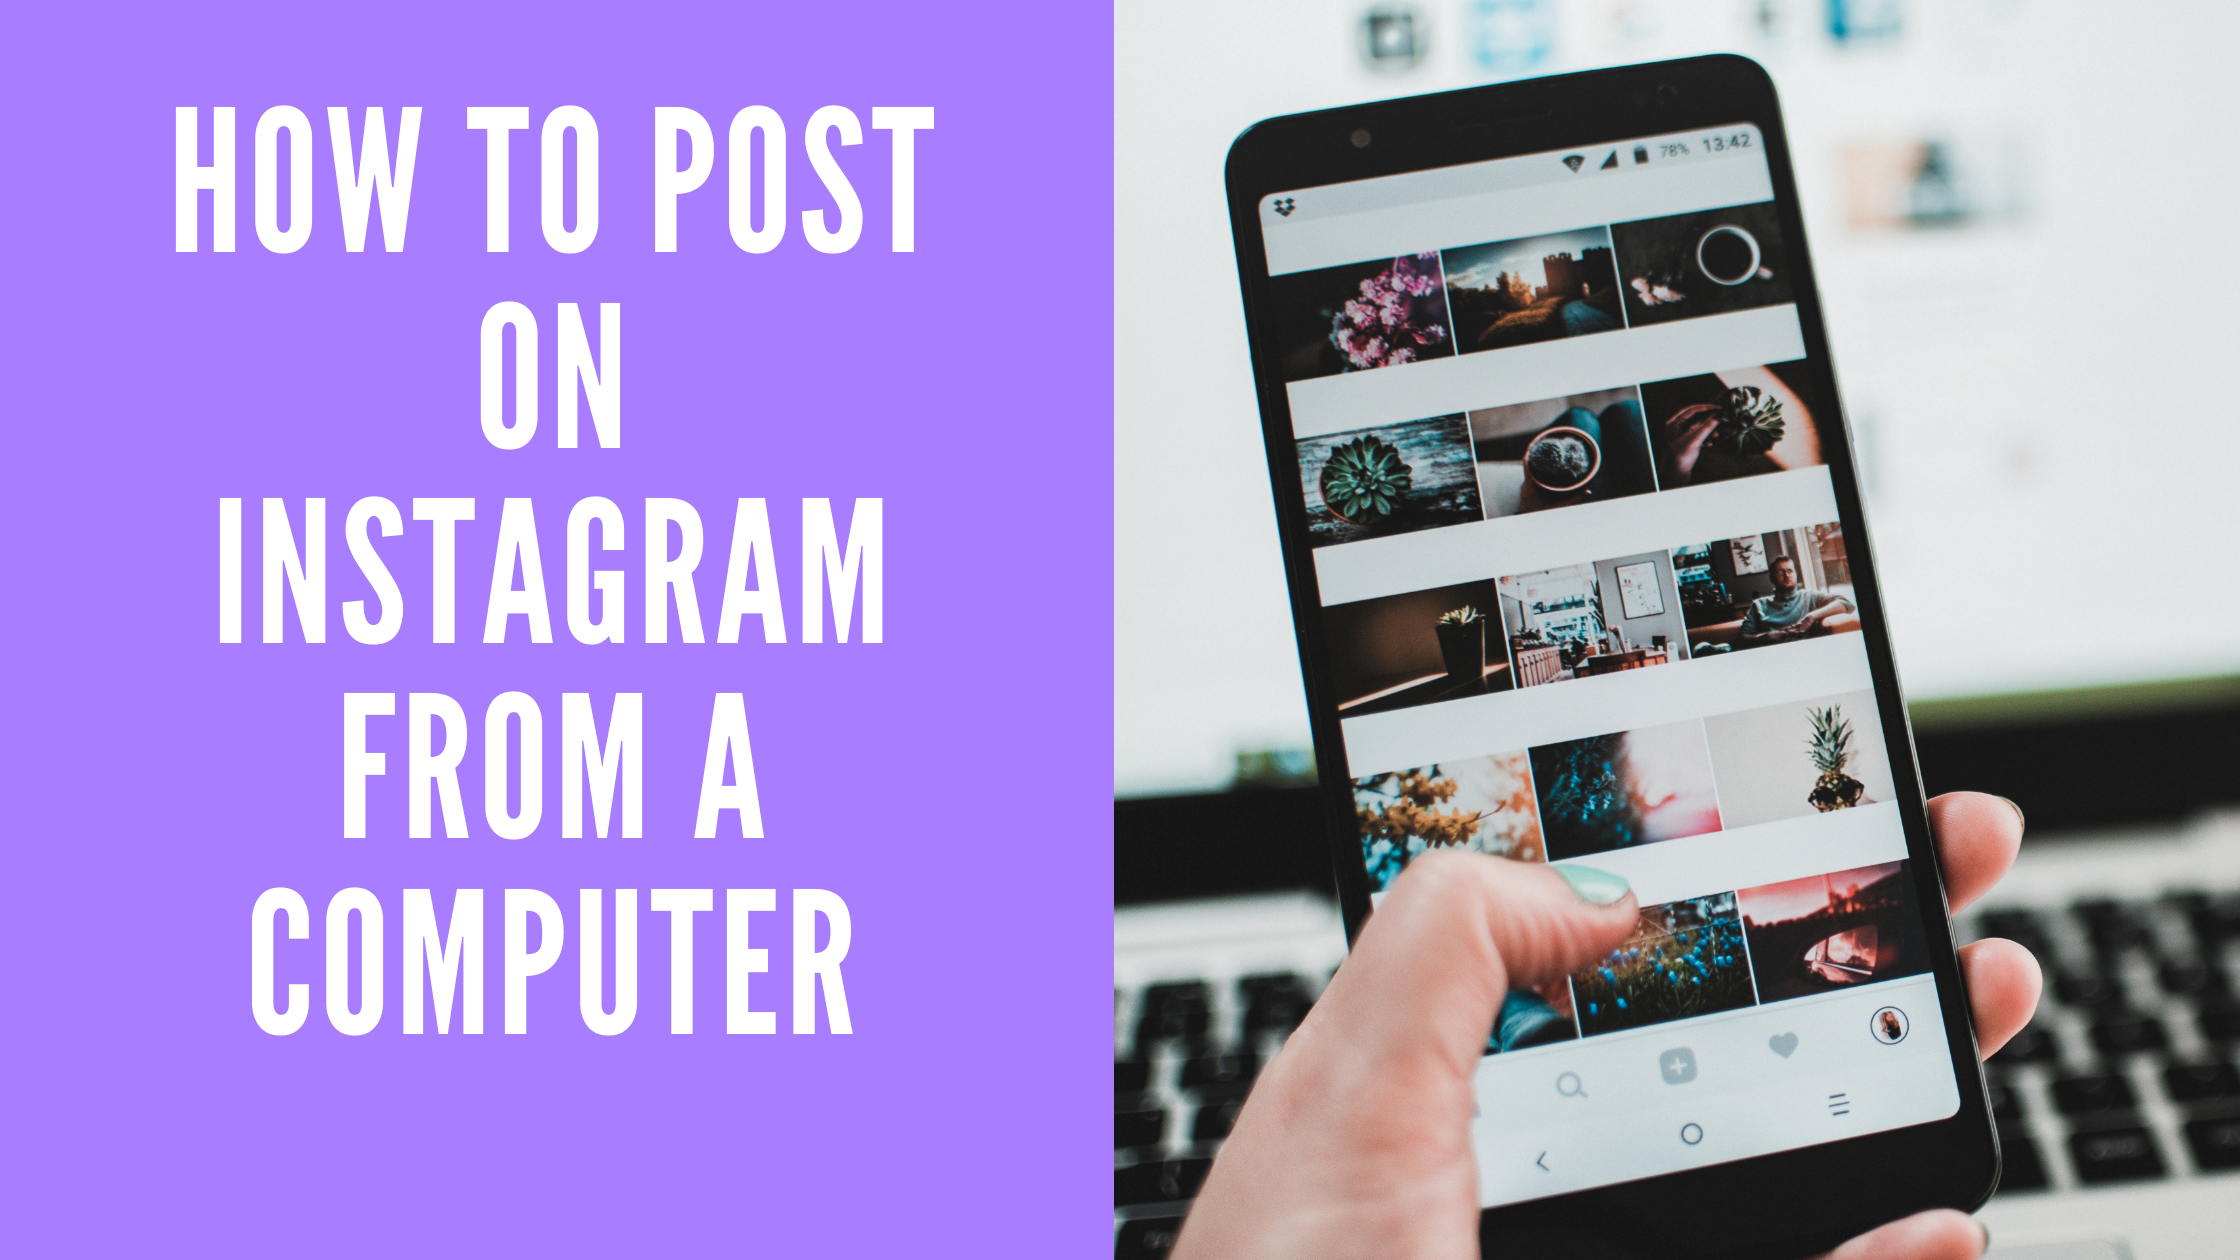 How To Post On Instagram From a Computer